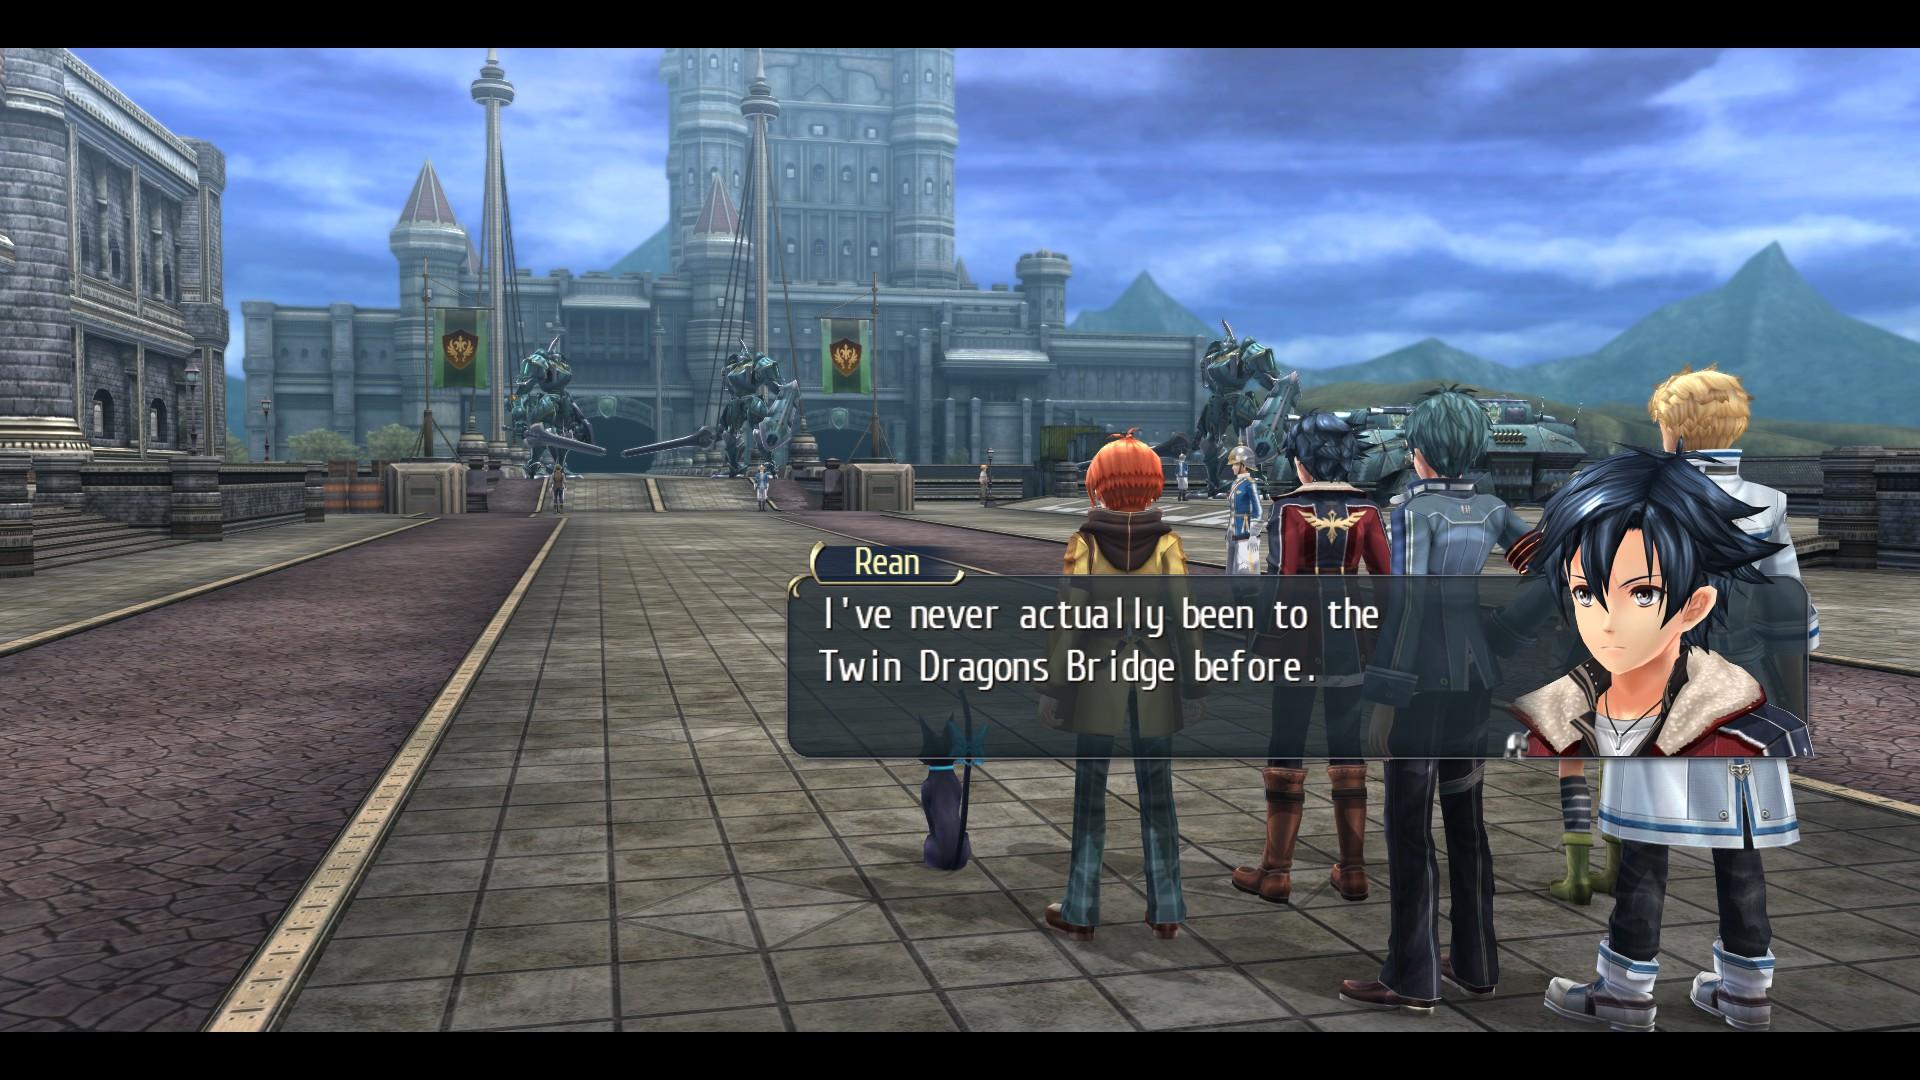 Screenshot №5 from game The Legend of Heroes: Trails of Cold Steel II